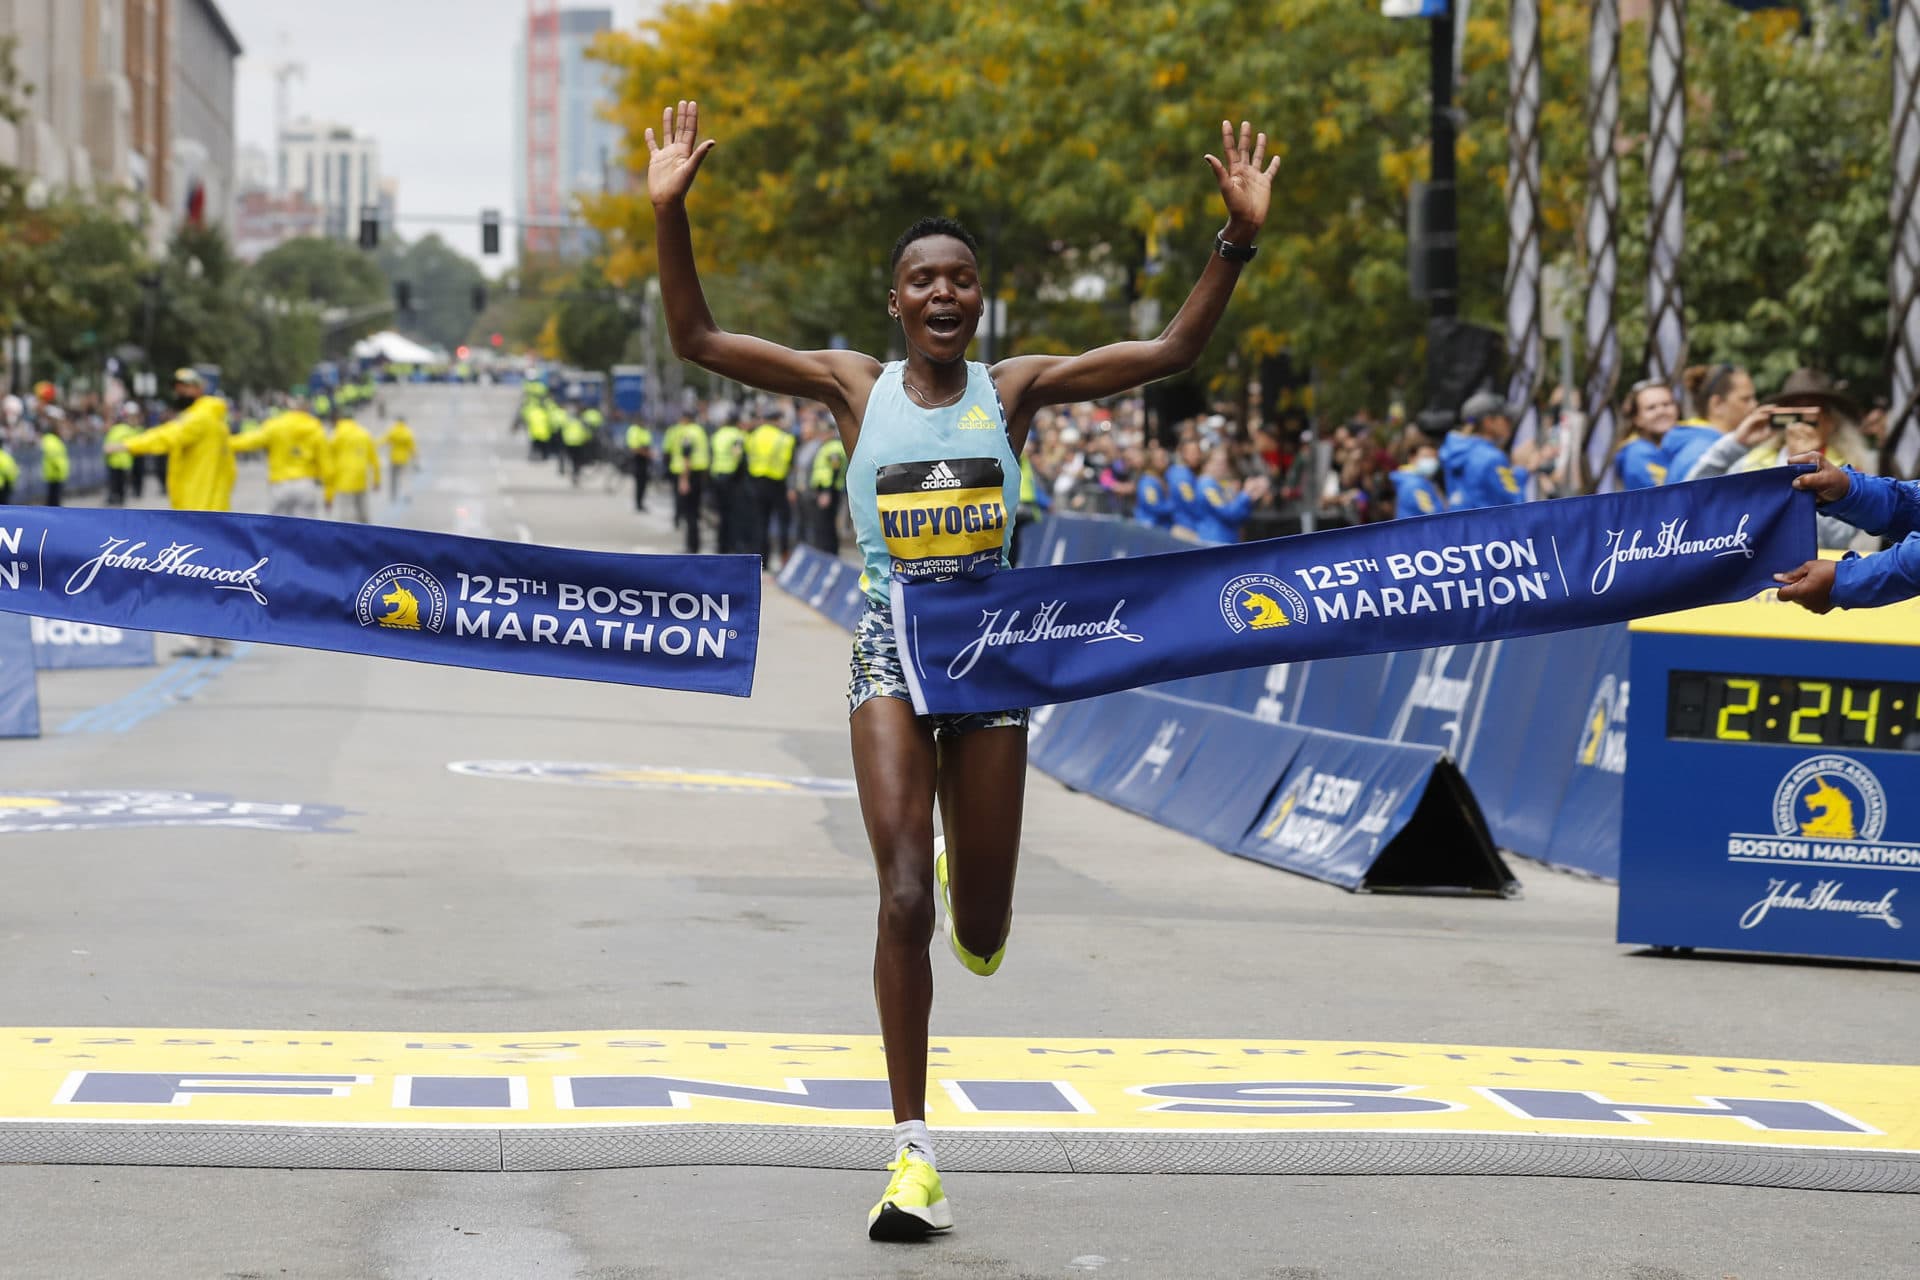 Diana Kipyogei, of Kenya, hits the tape to win the women's division of the 125th Boston Marathon. (Winslow Townson/AP)